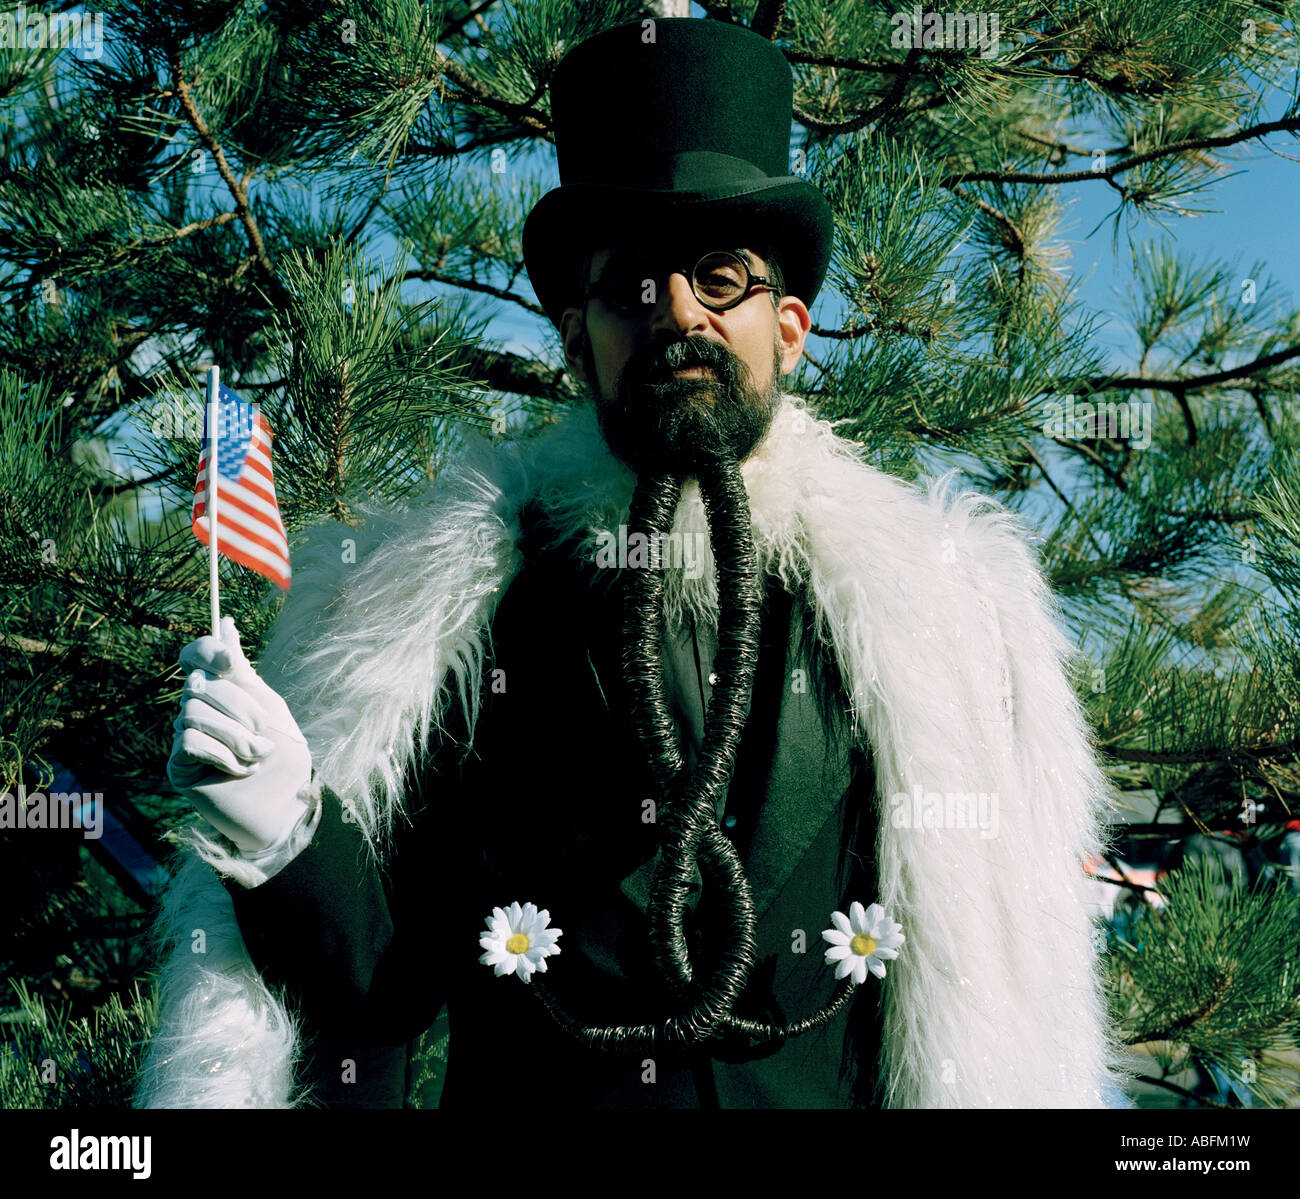 Contestant from the 2003 World Beard & Moustache Championship held in Carson City, USA Stock Photo